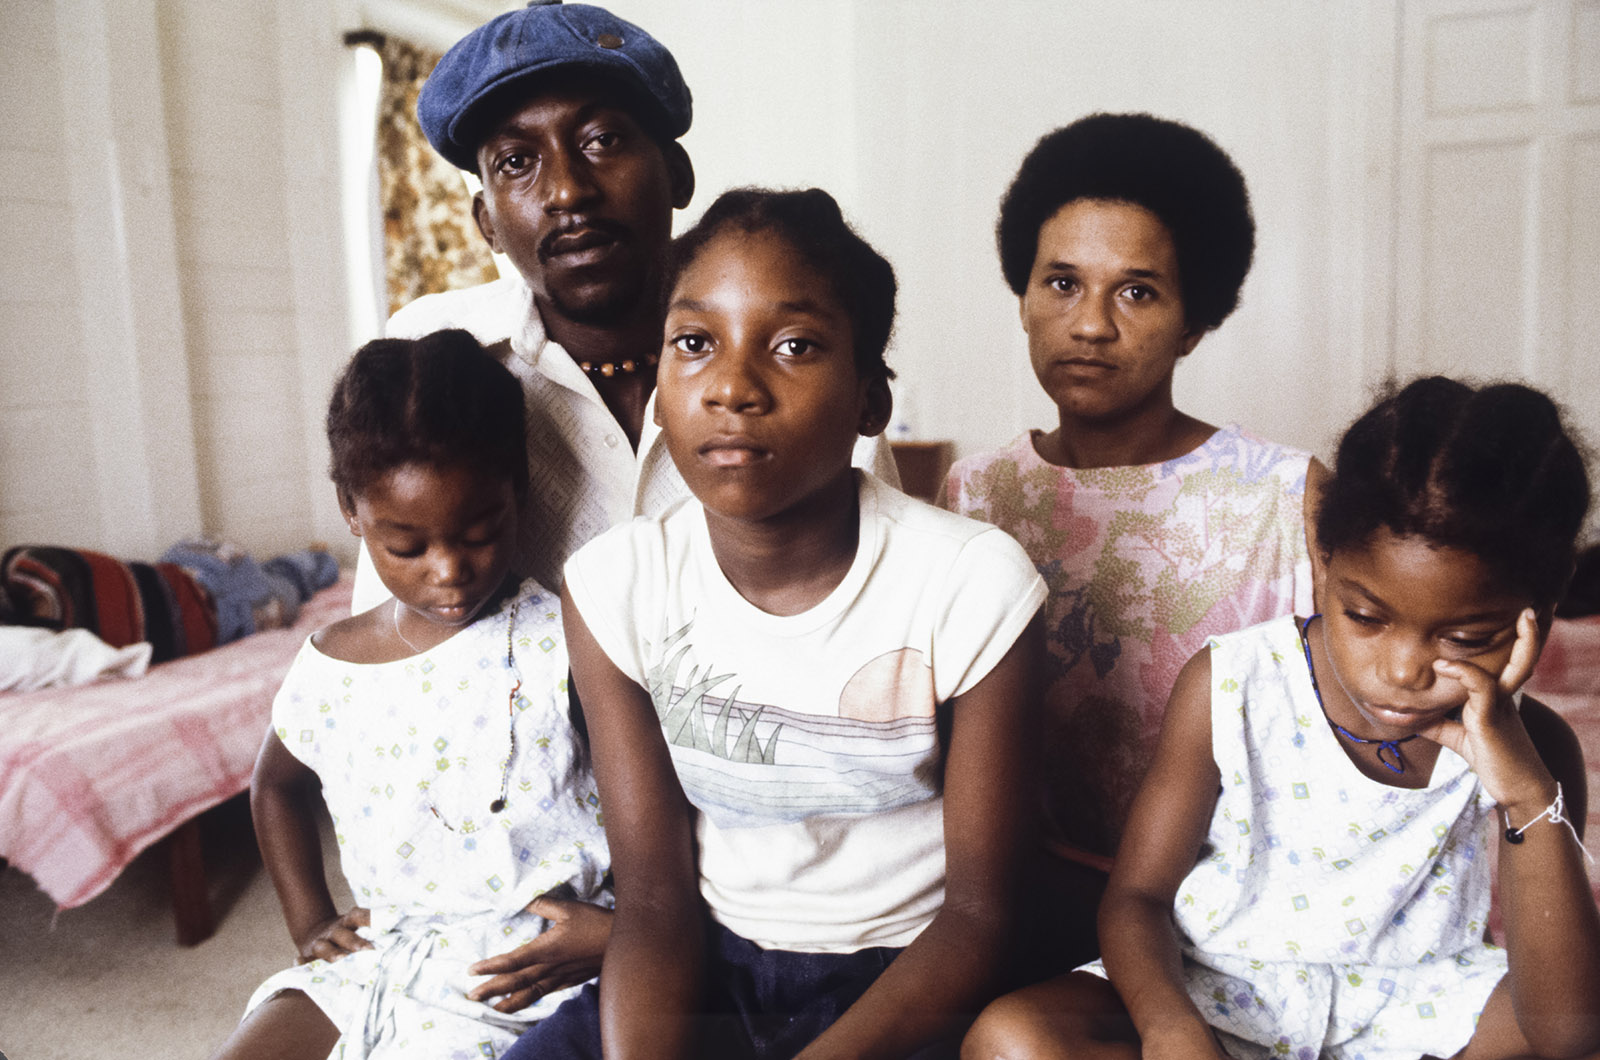 The Evans family, who survived the Jonestown massacre by walking out of the camp on the morning of November 18, saying they were going on a family picnic, United States, November 30, 1978